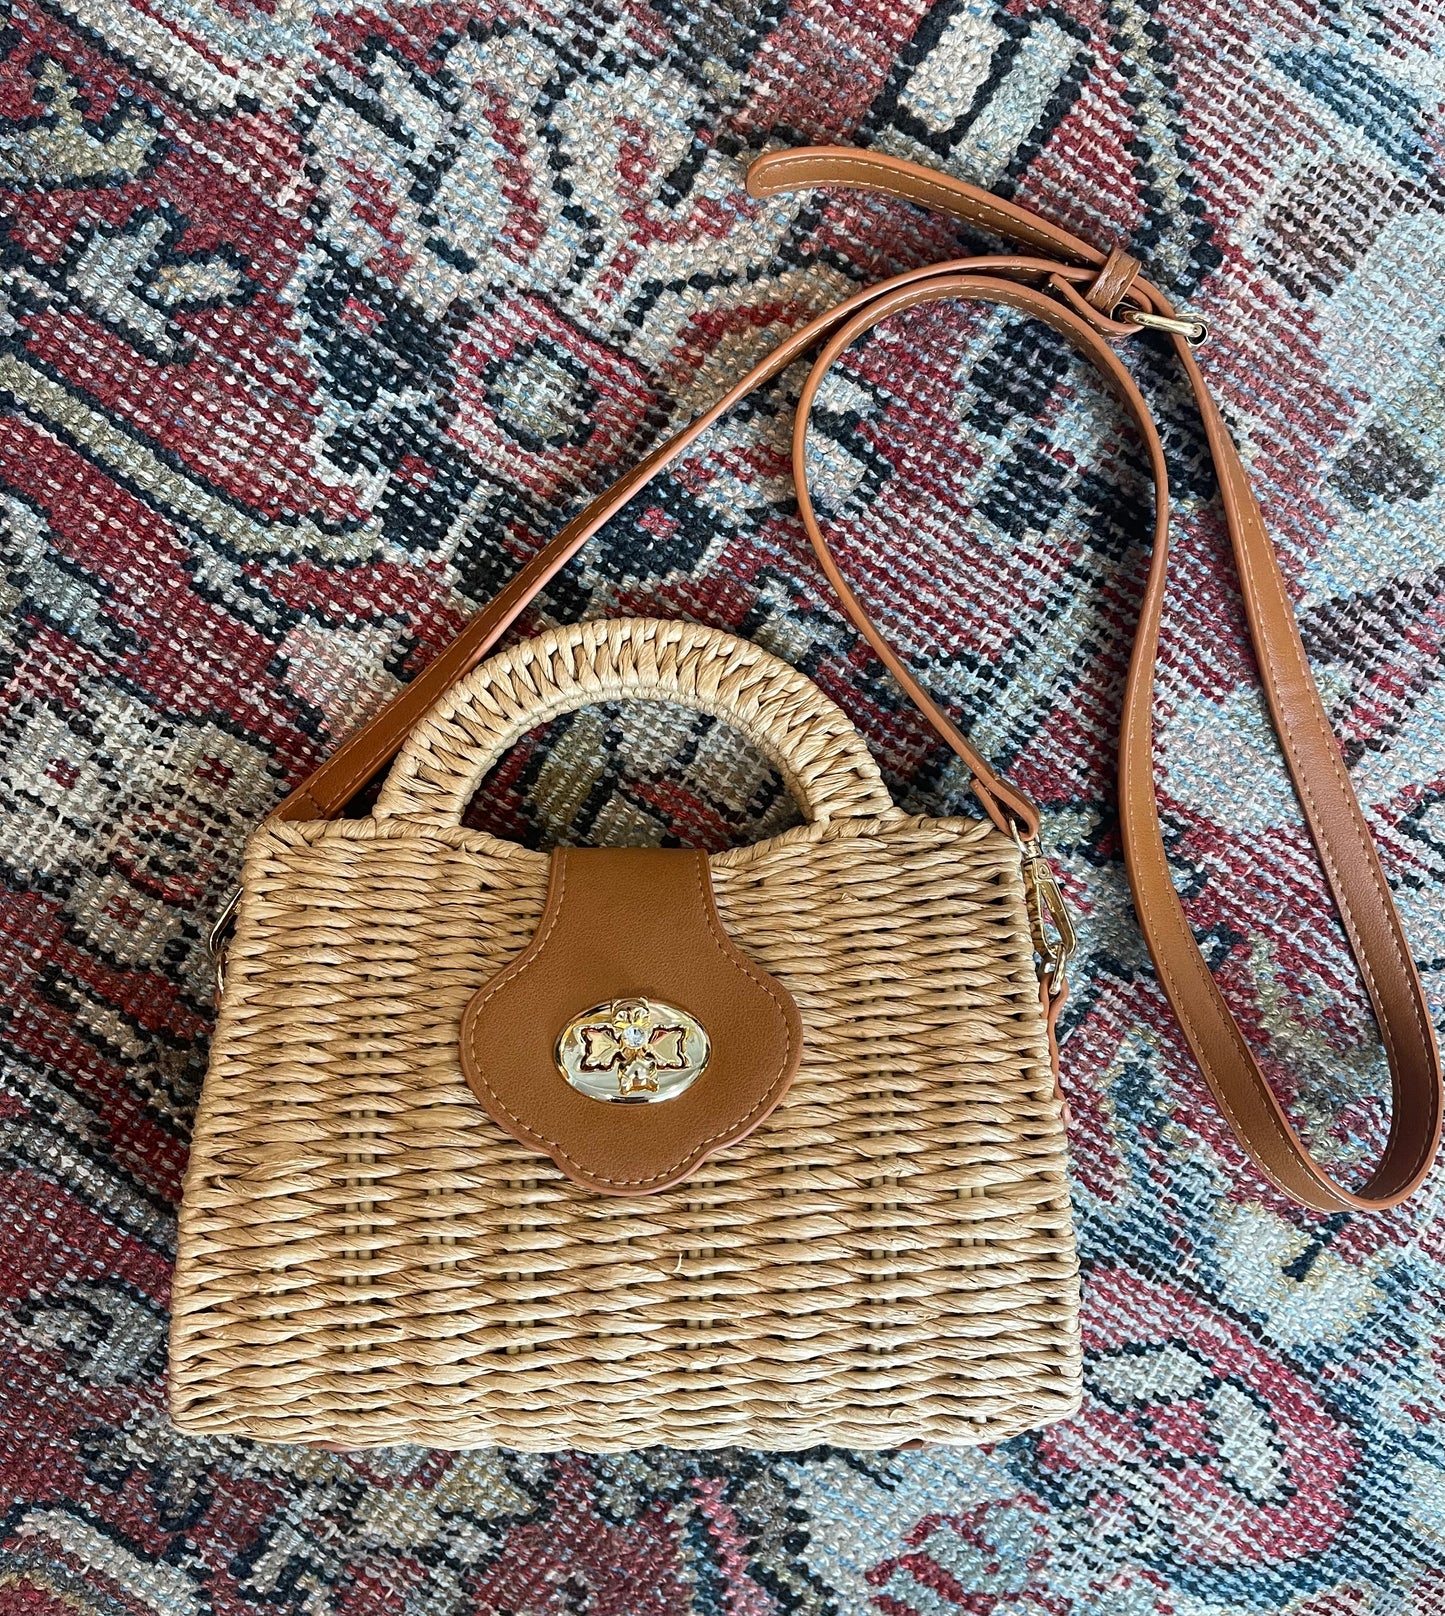 No Place Like Home Straw Bag in Coco